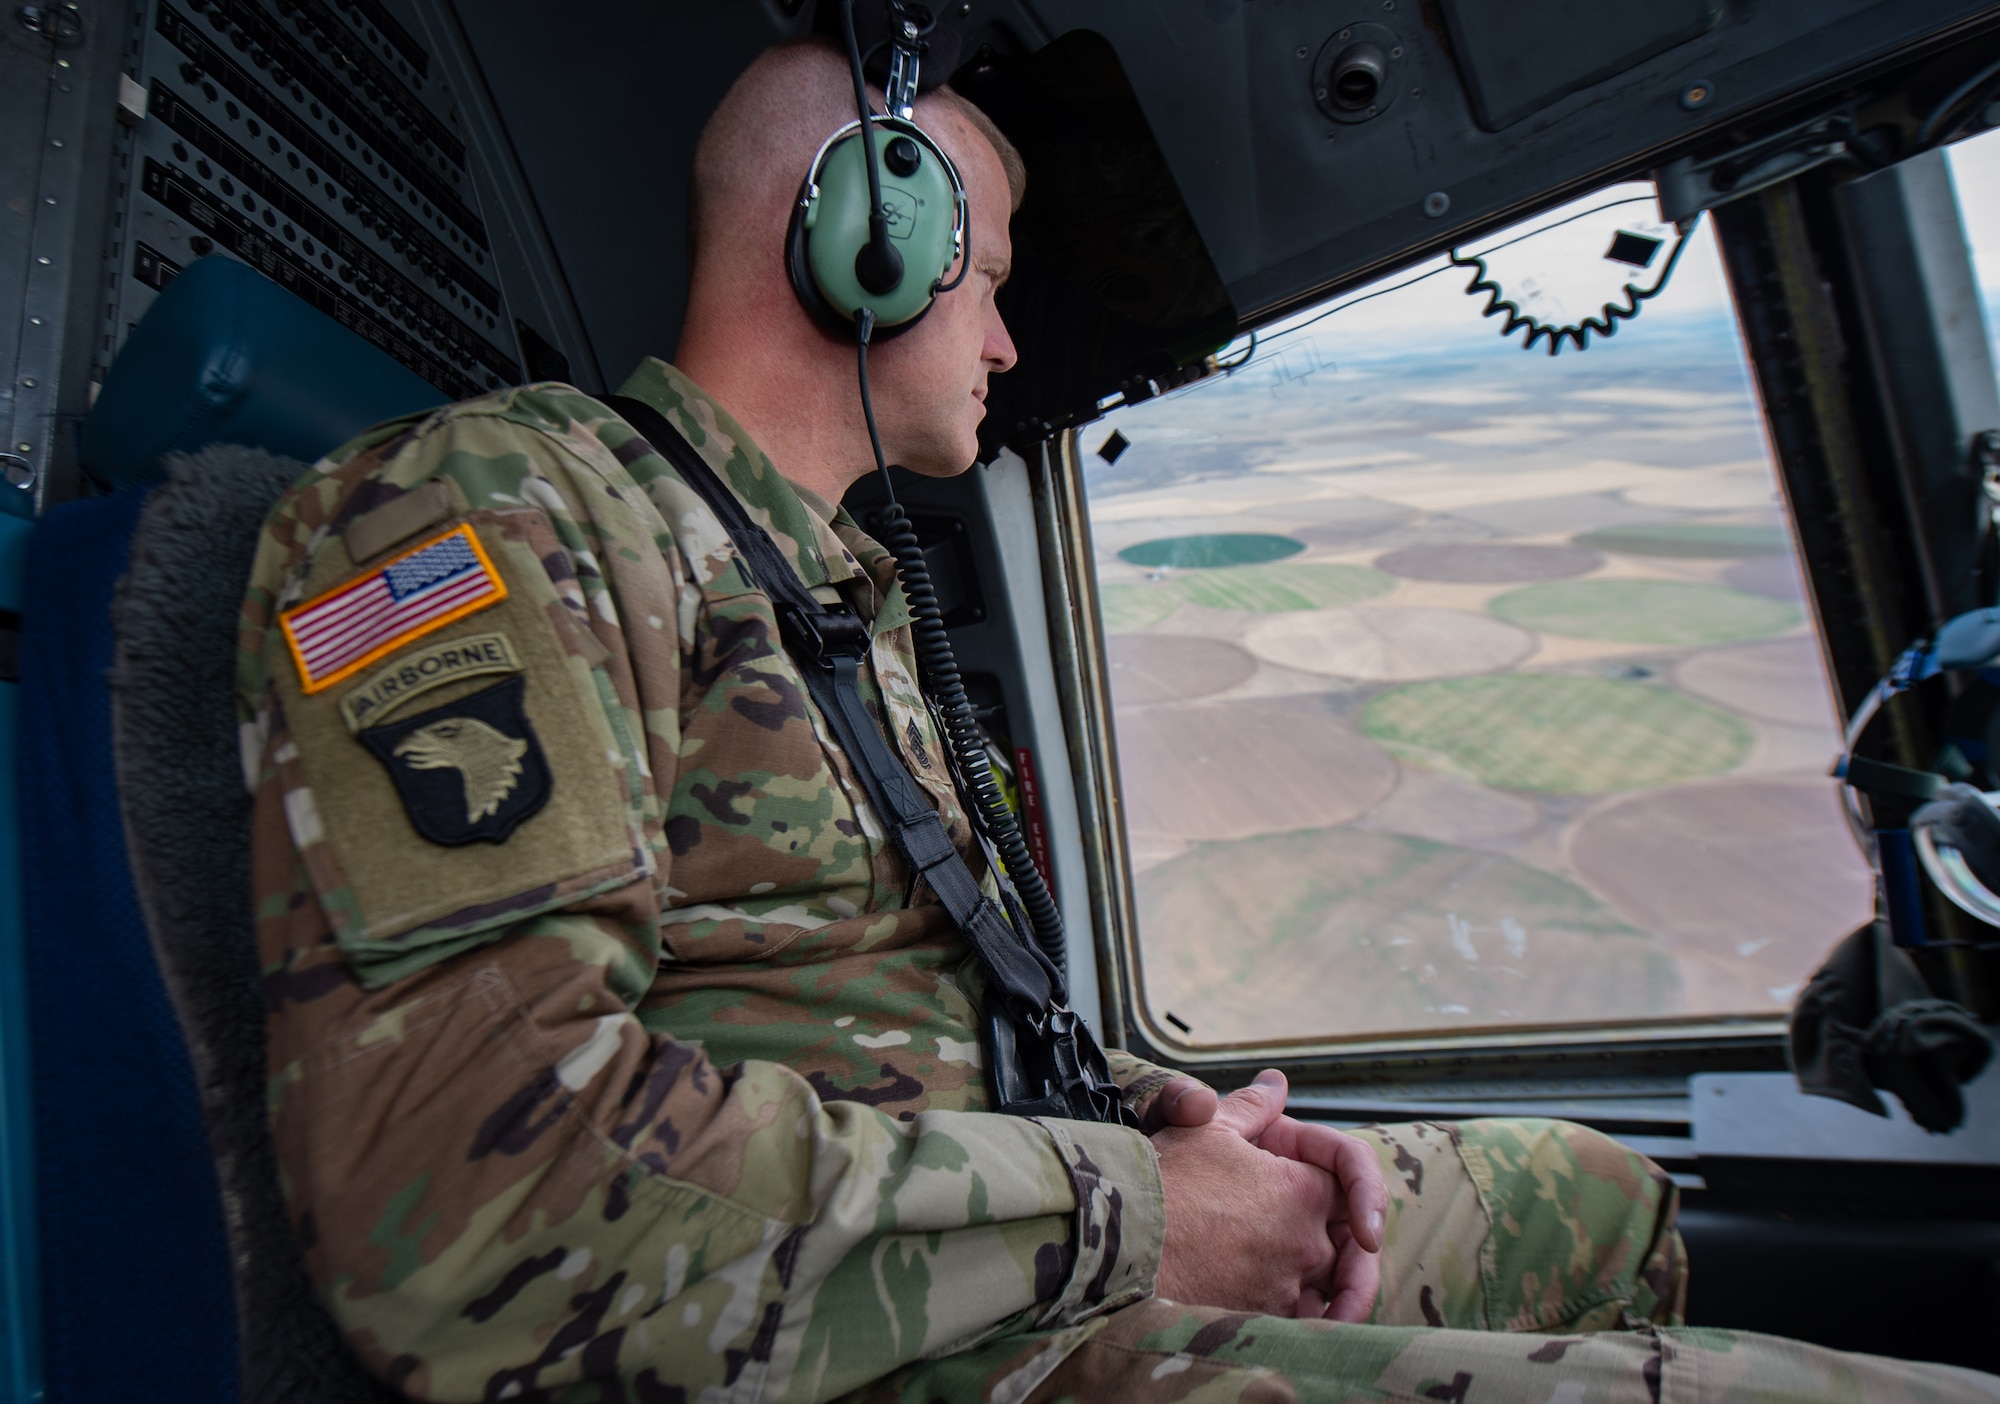 U.S. Army Command Sgt. Maj. Timothy Marble, Joint Base Lewis-McChord (JBLM) command sergeant major, looks out the window of a C-17 Globemaster III near Moses Lake Municipal Airport, Wash., Oct 1, 2019. The flight provided training opportunities for 7th Airlift Squadron pilots to practice a variety of aircraft landings for a mobility movement exercise. (U.S. Air Force photo by Senior Airman Tryphena Mayhugh)